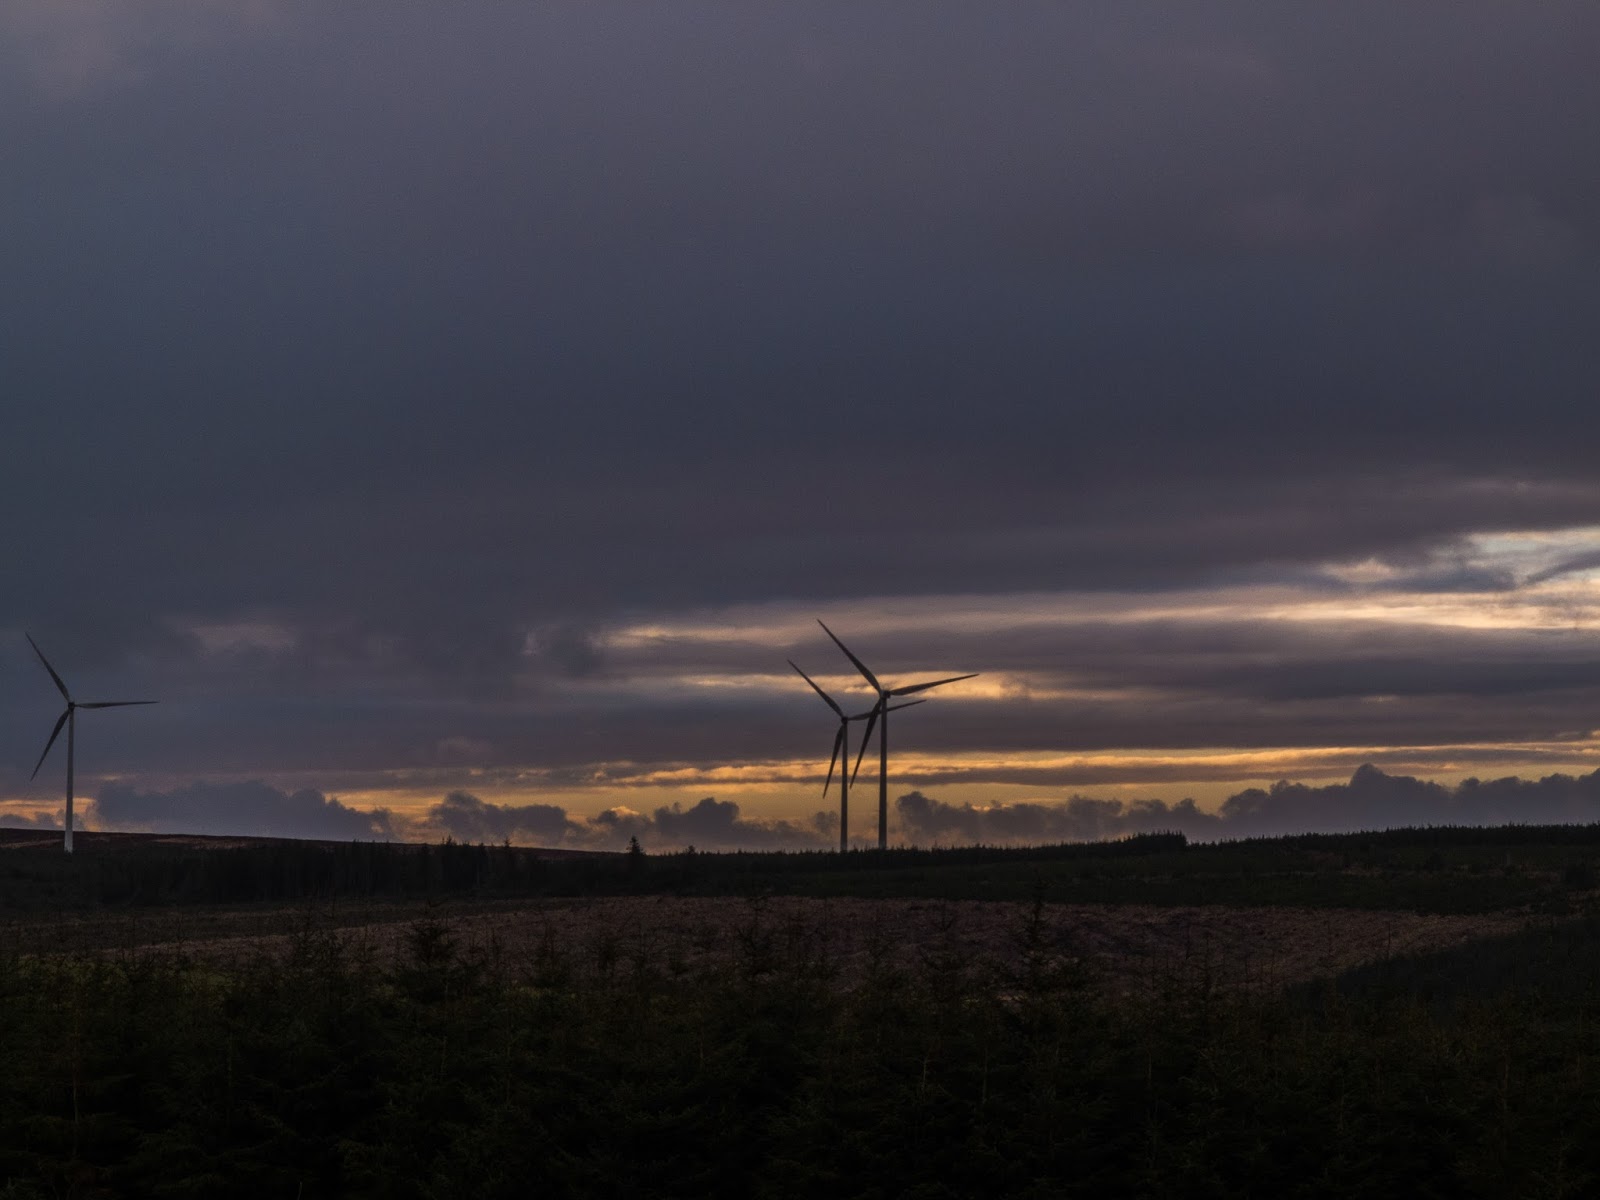 Dramatic sunset clouds and windmills in the Boggeragh Windmill Farm in North Cork.